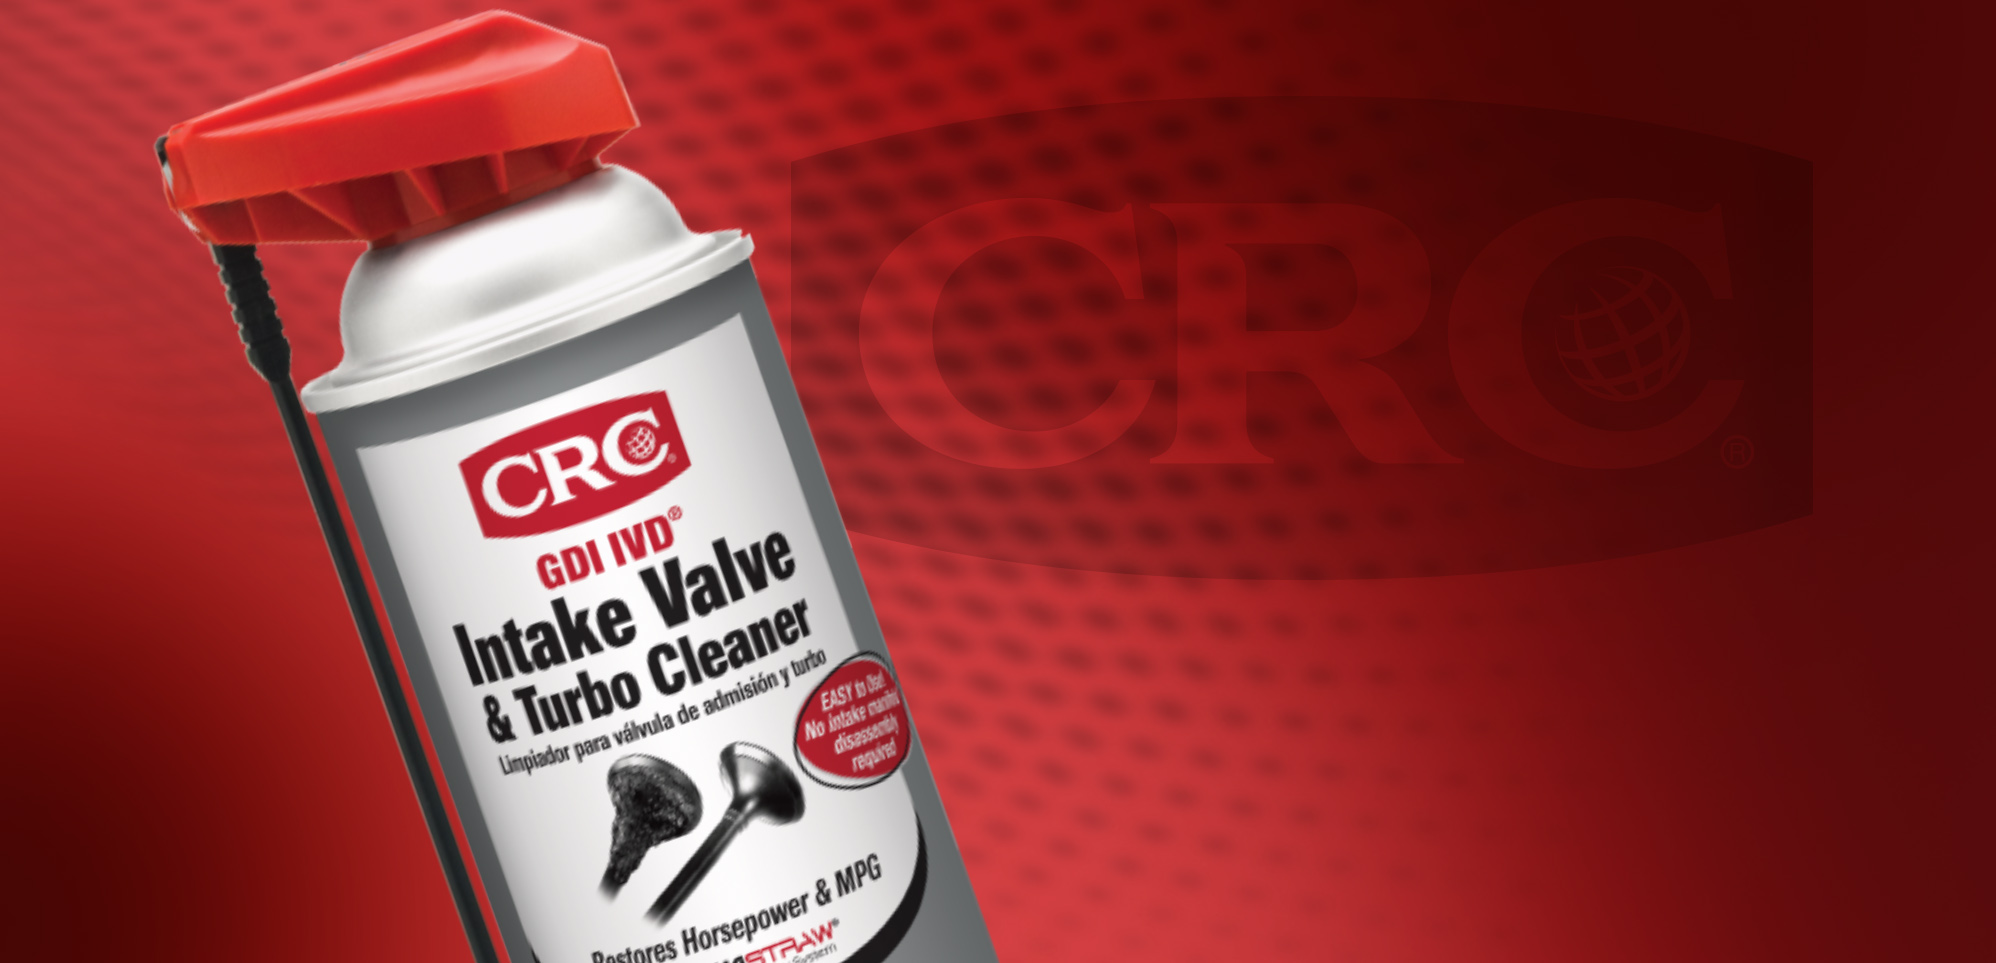 CRC GDI IVD® Intake Valve & Turbo Cleaner Technology is Published with United States Patent and Trademark Office